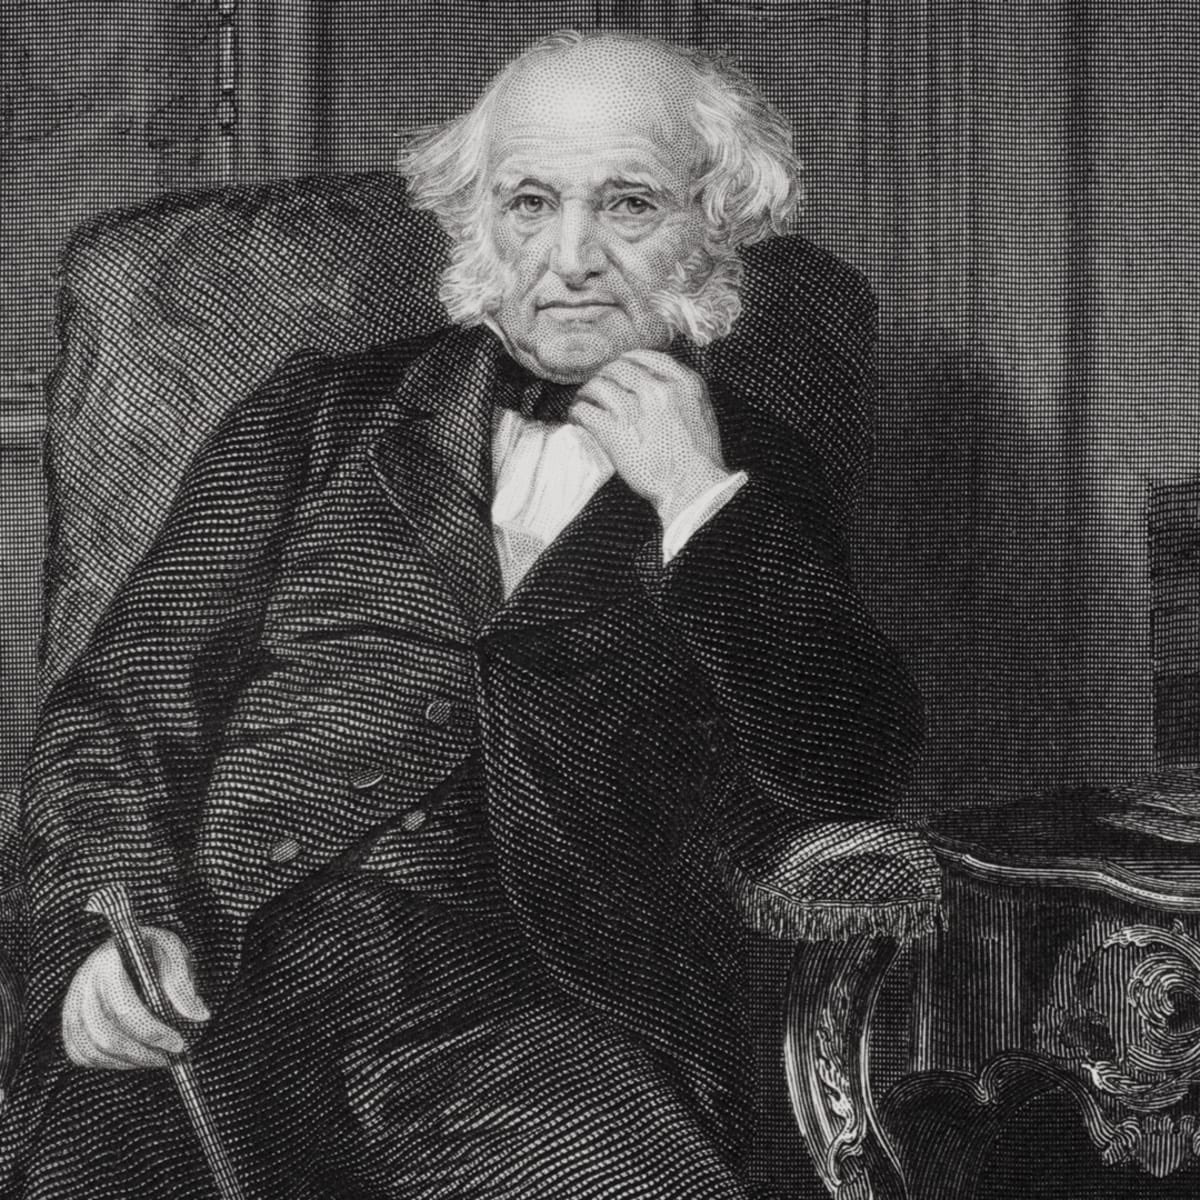 Martin Van Buren sucked. Inherited Jackson’s hellhole of an economy, and somehow made it WORSE. On top of that started yet ANOTHER war against Natives. Not only that, he’s credited for helping solidify the two-party system. Remember this face when you begrudgingly vote for Biden.